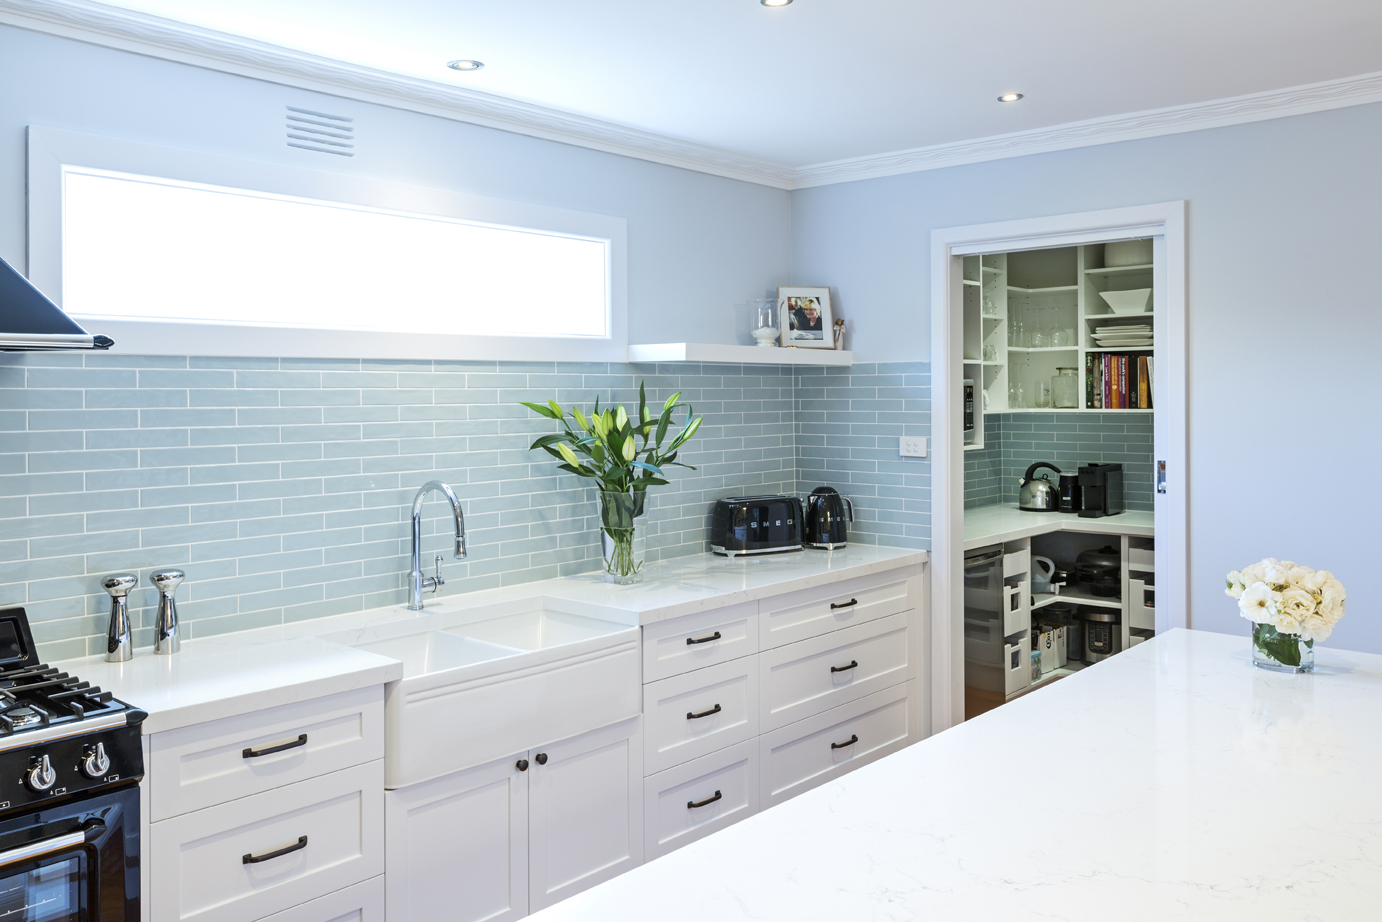 white kitchen with light blue tiles and wallpaper, door leading to extra storage